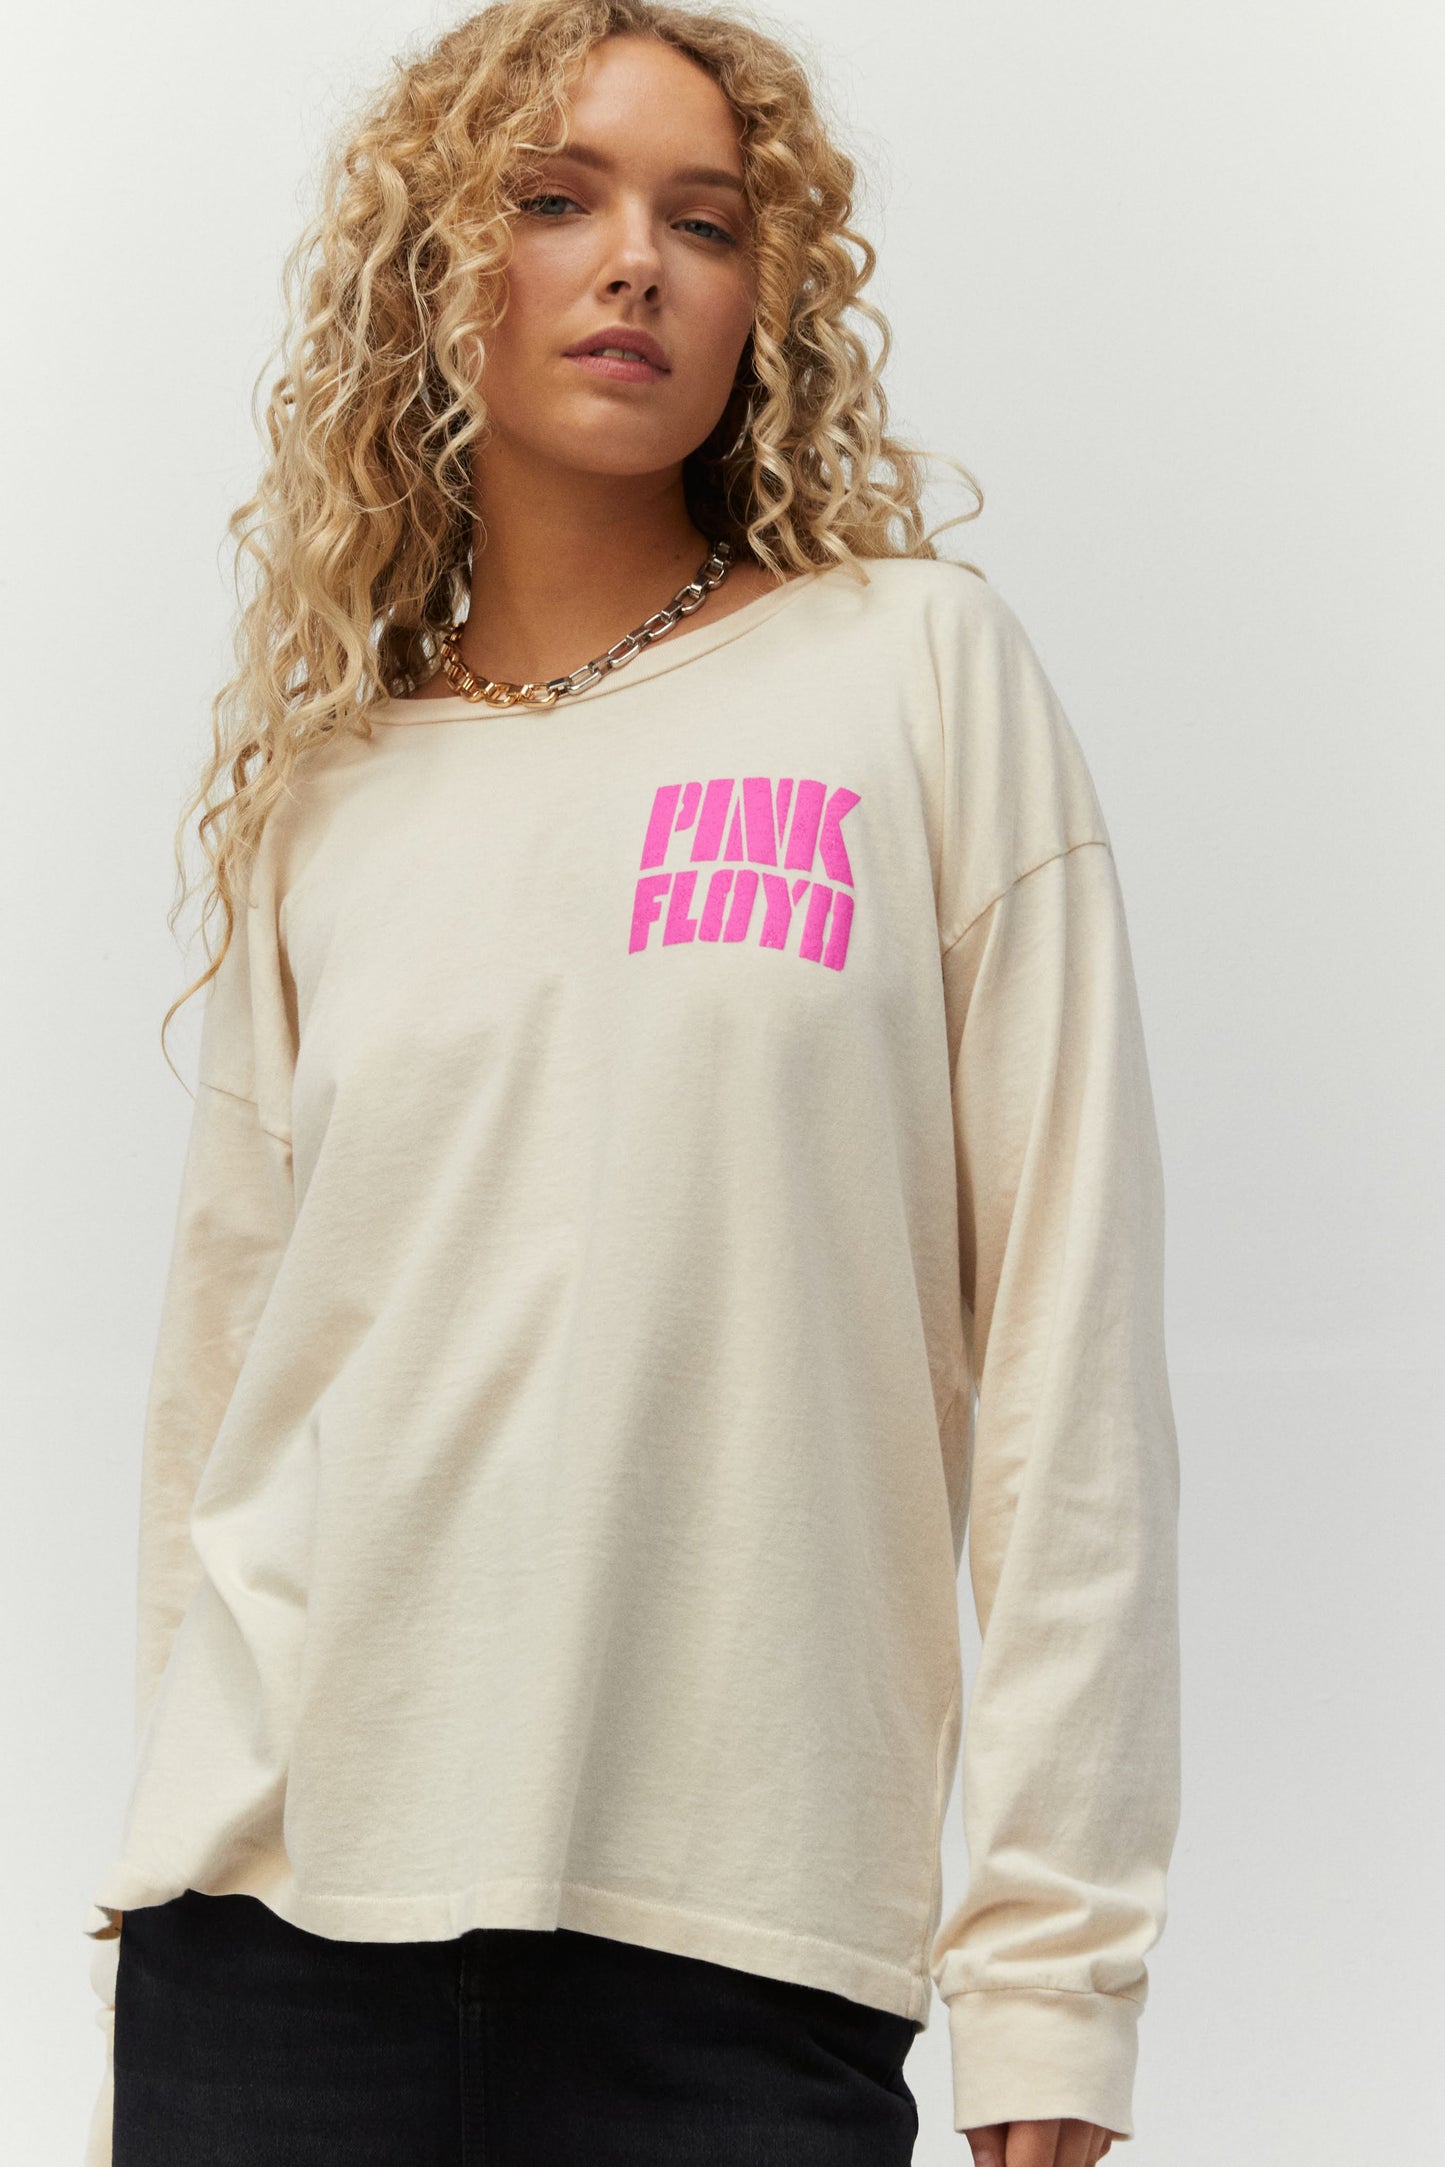 Blonde curly-haired model featuring a white-colored long sleeve designed with psychedelic-inspired block letters and a stamp of Pink Floyd’s inflatable pig, Algie, accented in pink and green puff ink